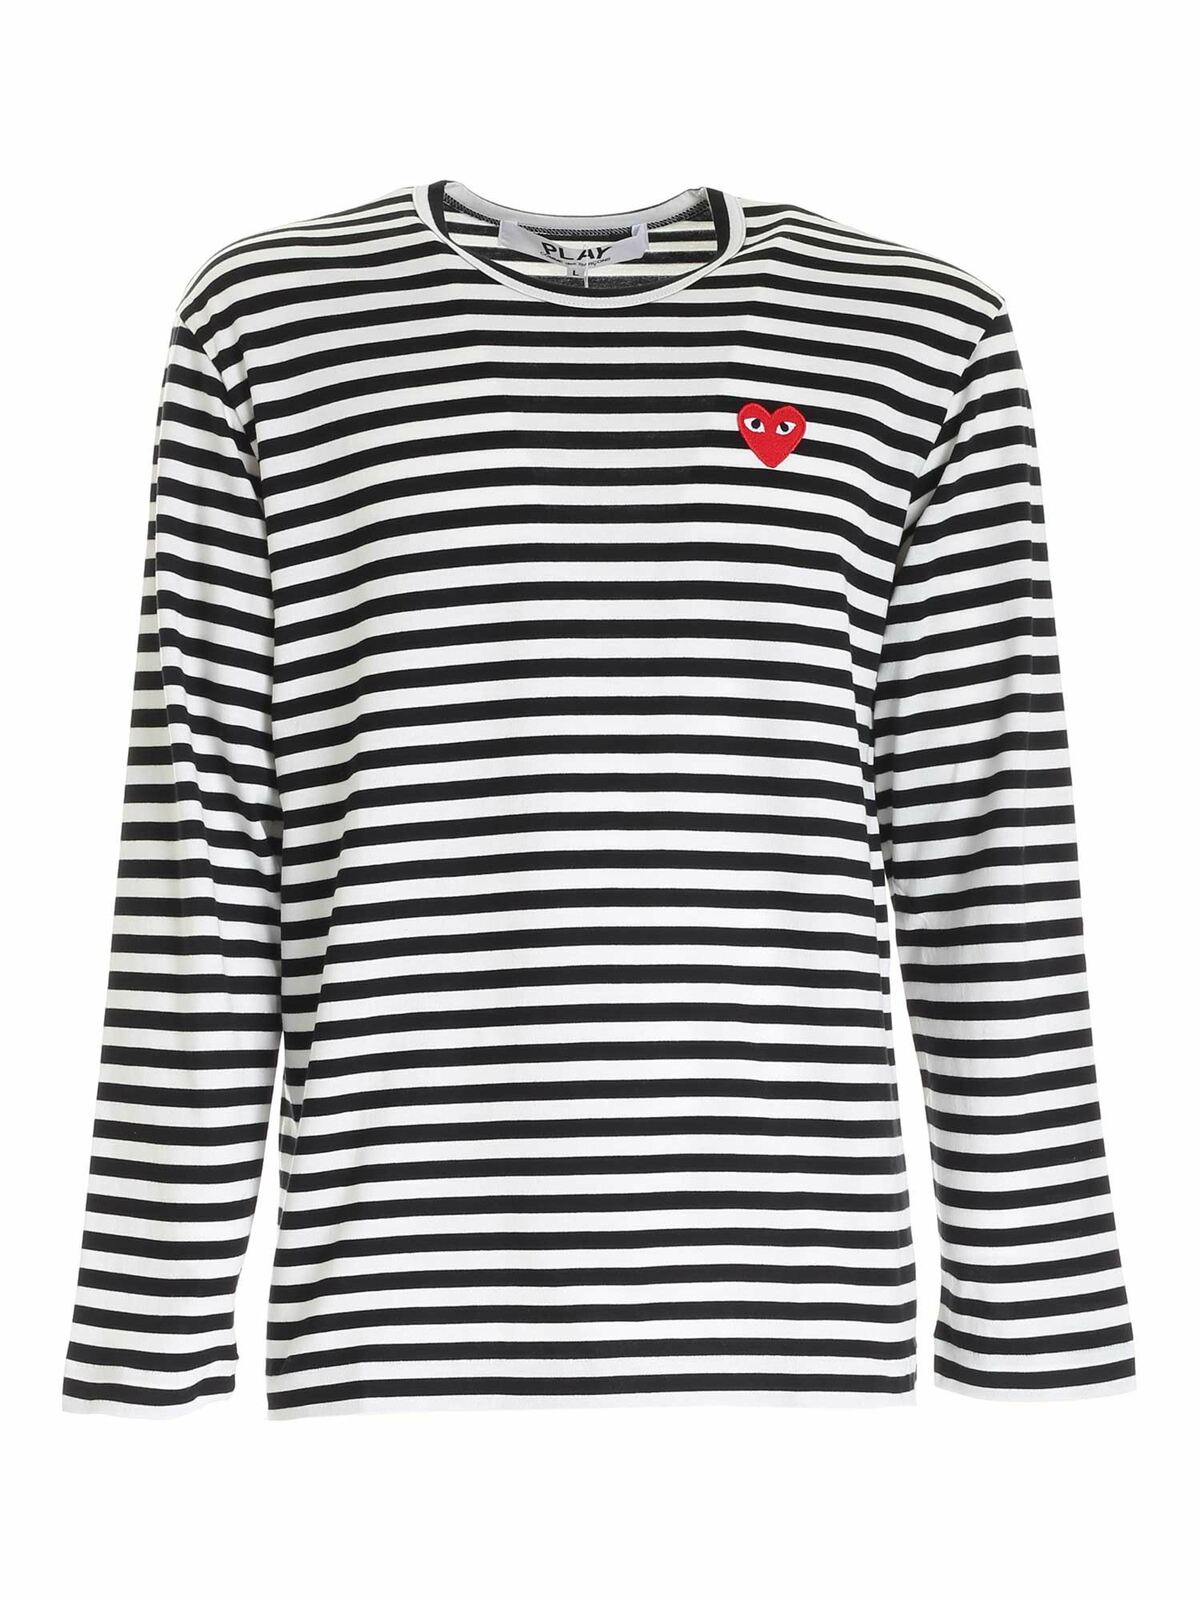 Comme Des Garçons Play Striped Long Sleeves T-shirt In White